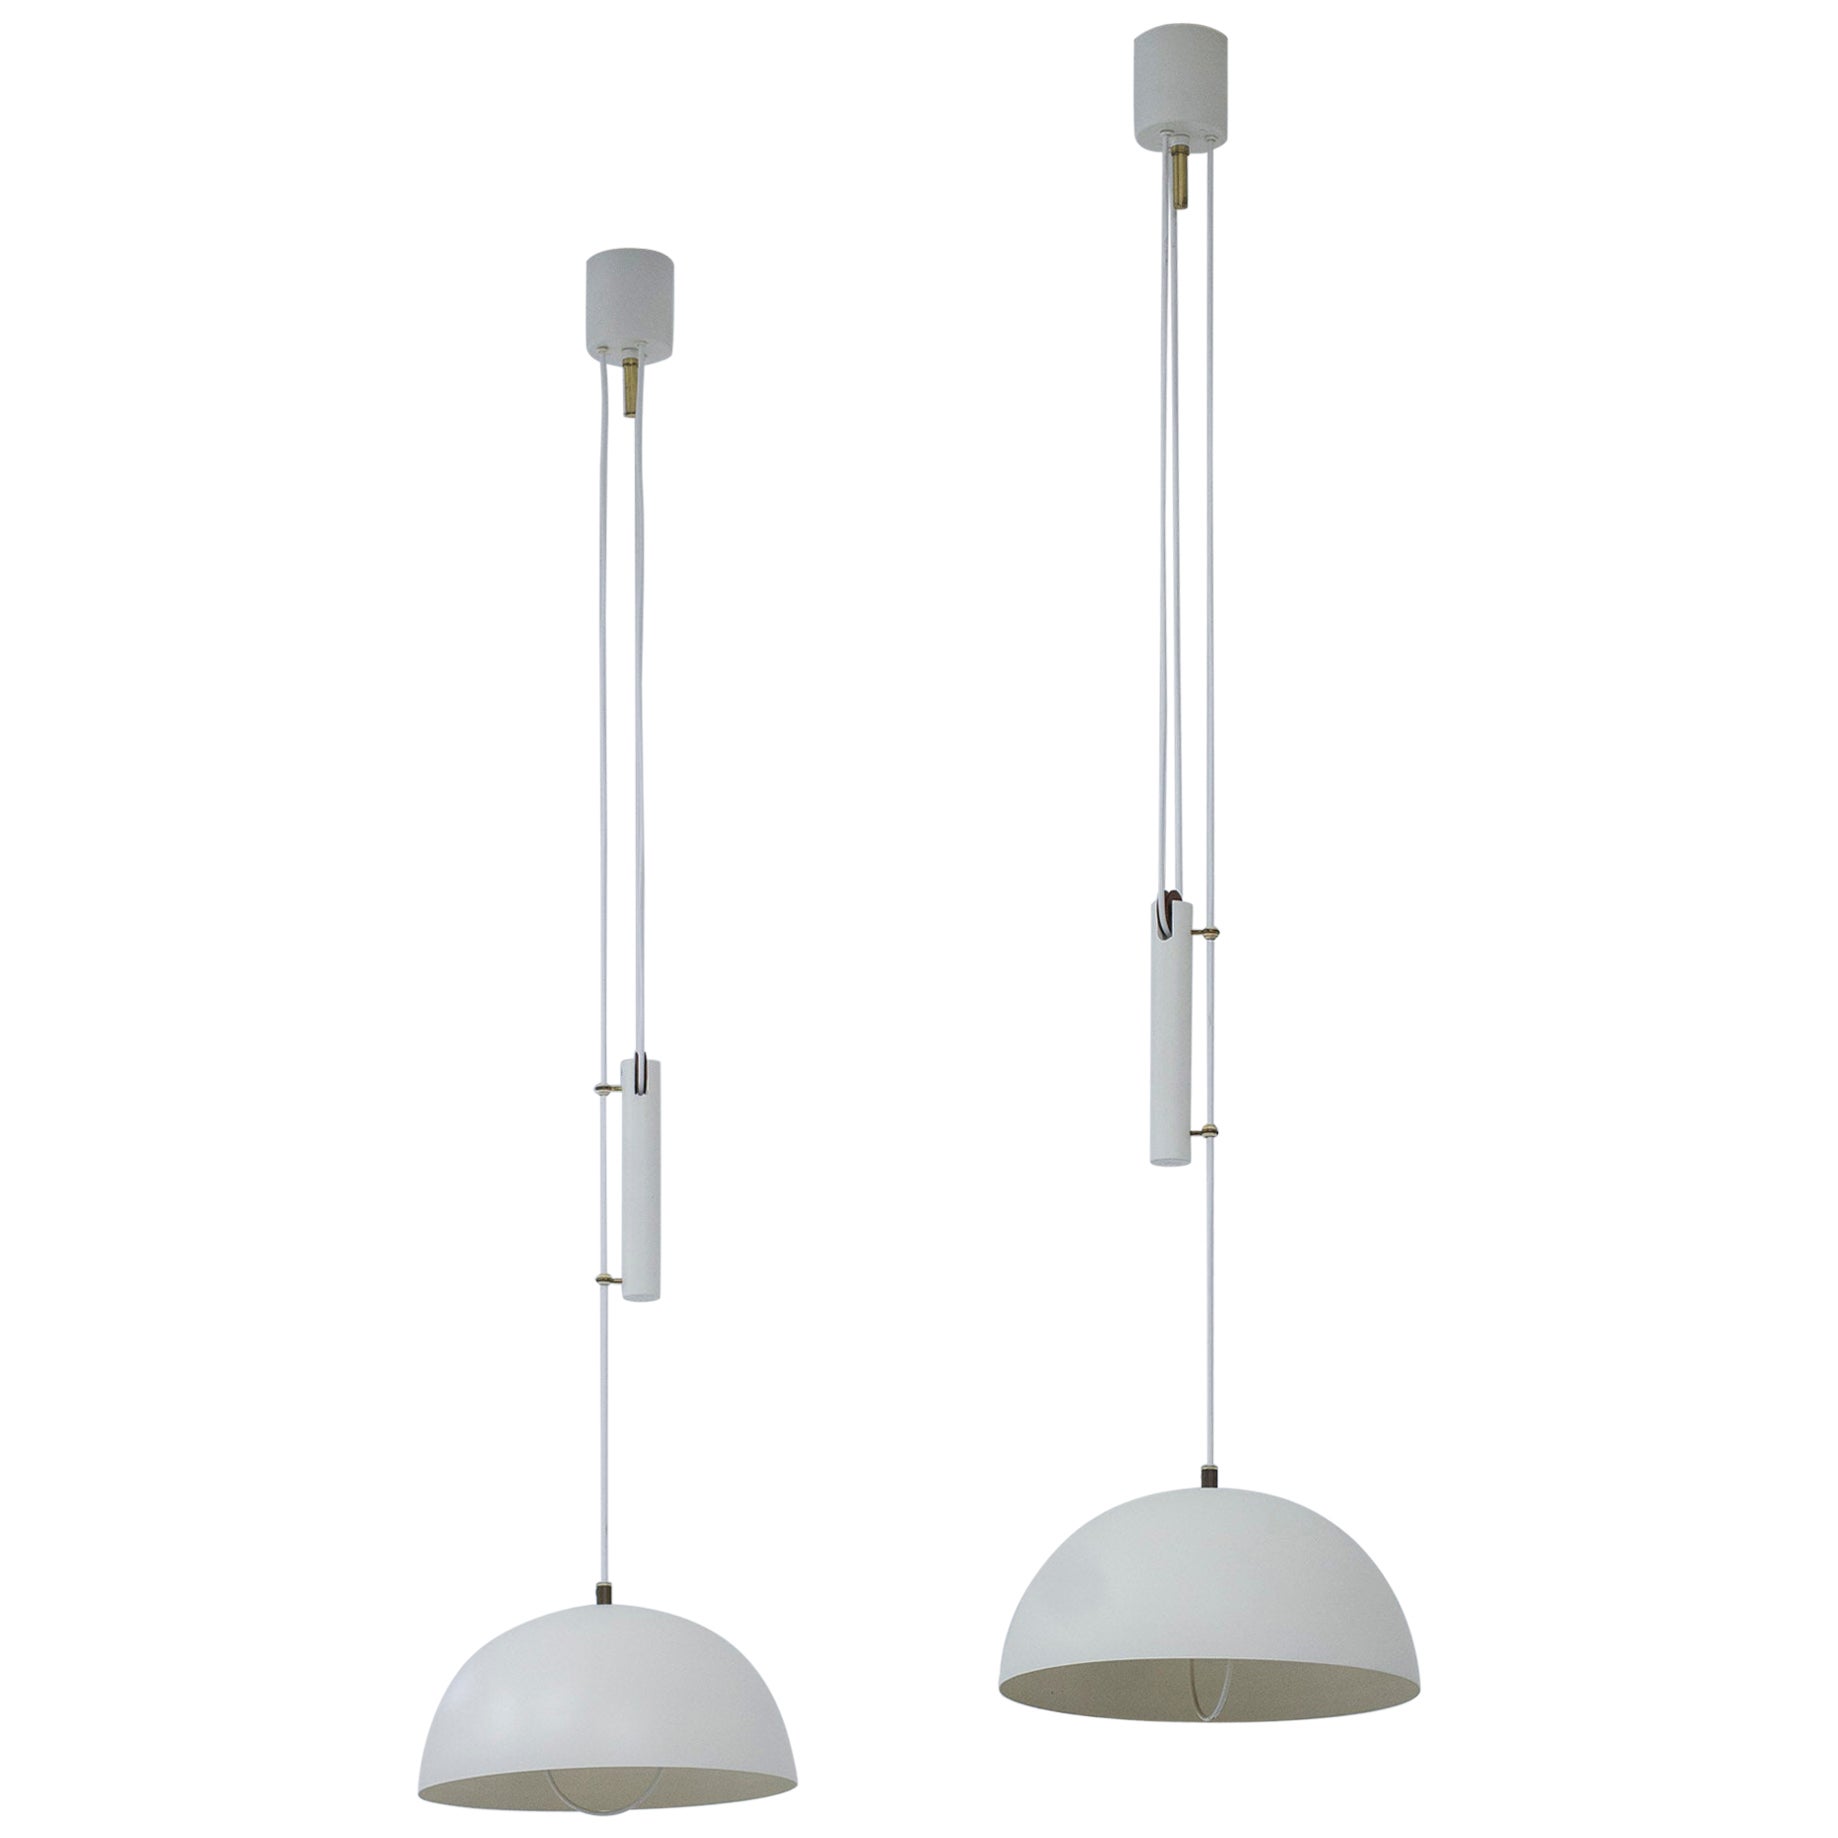 Pendant Lamps Attributed to Hans-Agne Jakobsson, Karlskron Lampfabrik, 1950s For Sale